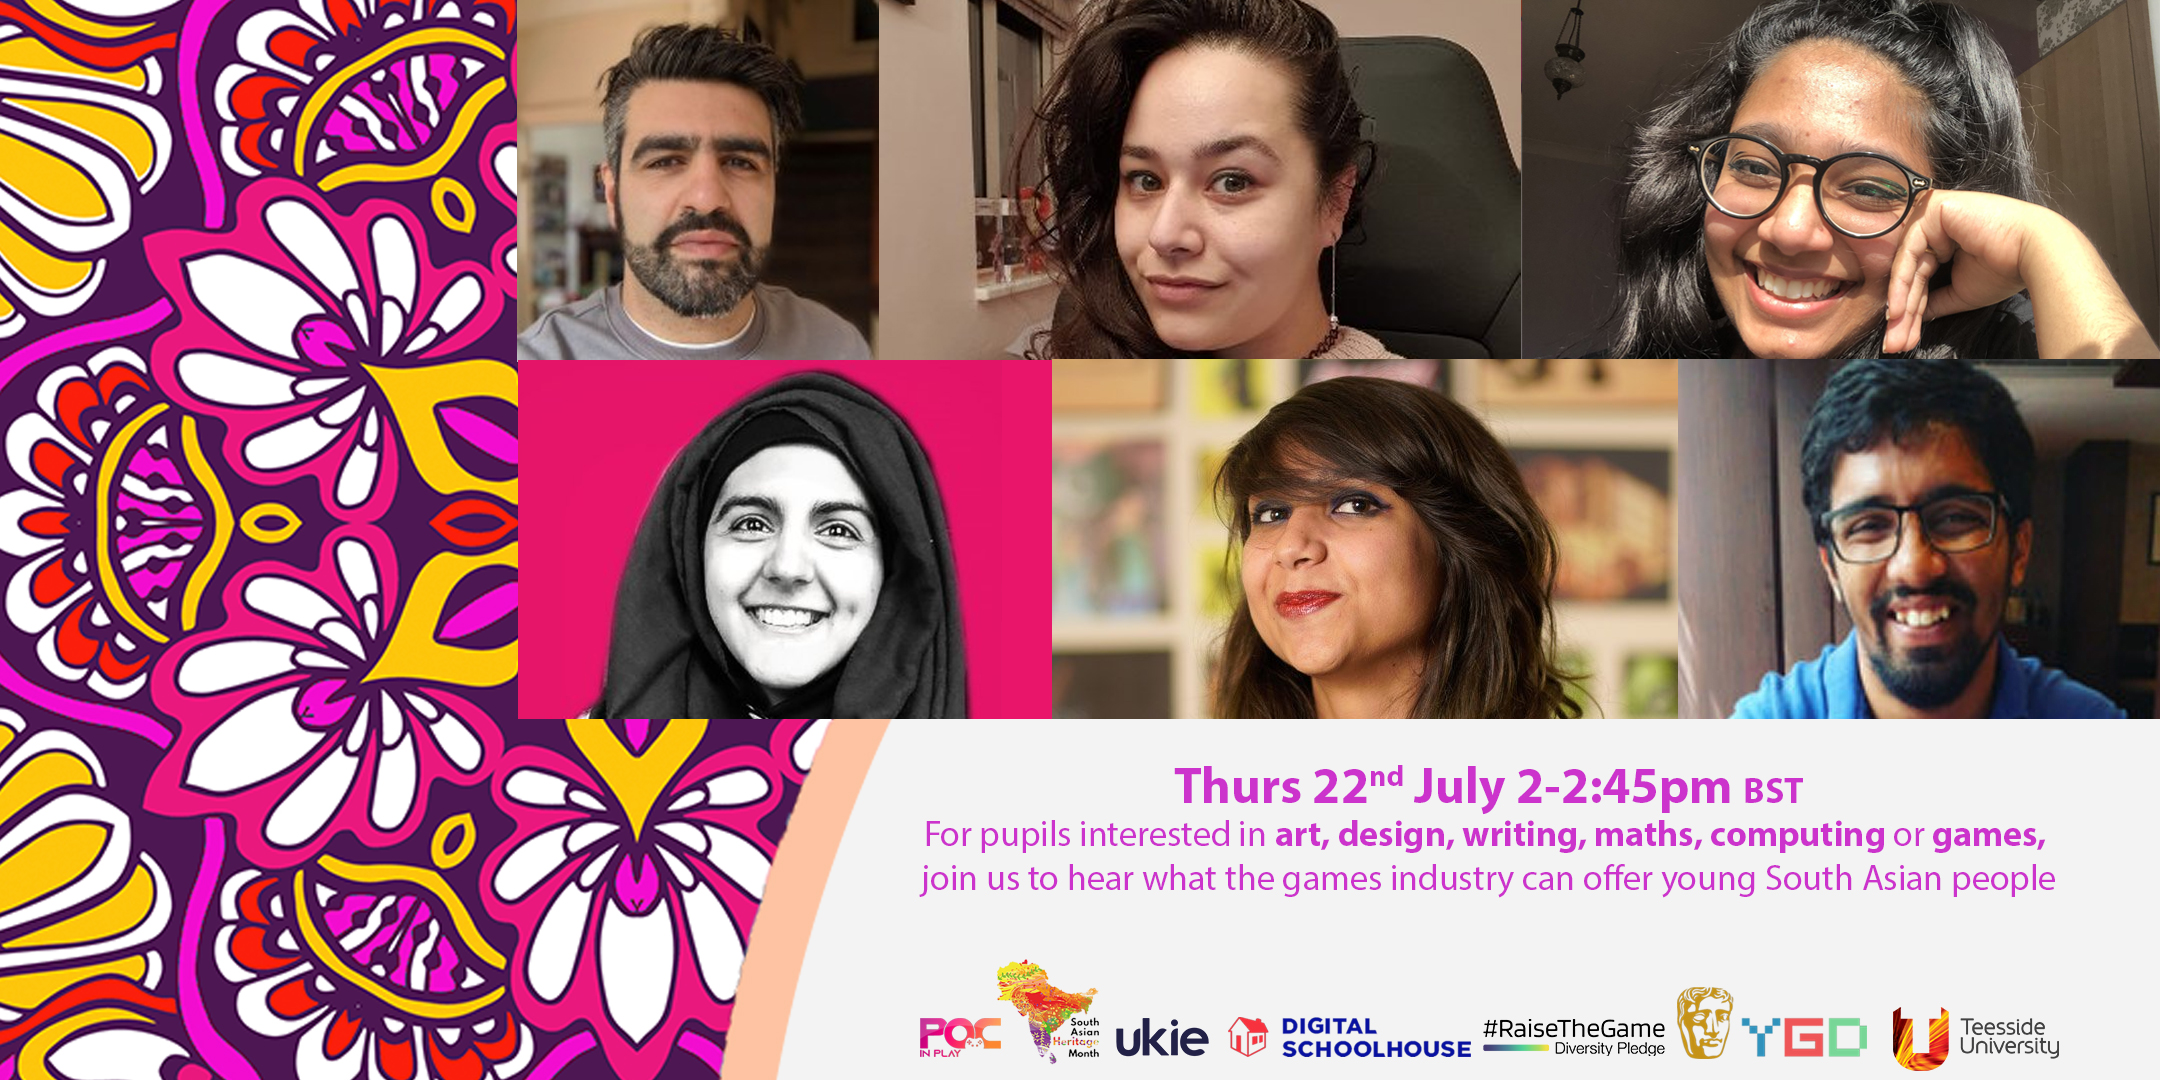 <img src="RTG_SouthAsianInGamesWebinar_EventBanner" alt="Virtual Careers Panel Event Between #RaiseTheGame, fellow Ukie initiative Digital Schoolhouse, POC In Play, Teesside University, and BAFTA YGDs, featuring upcoming and established South Asian game professionals">